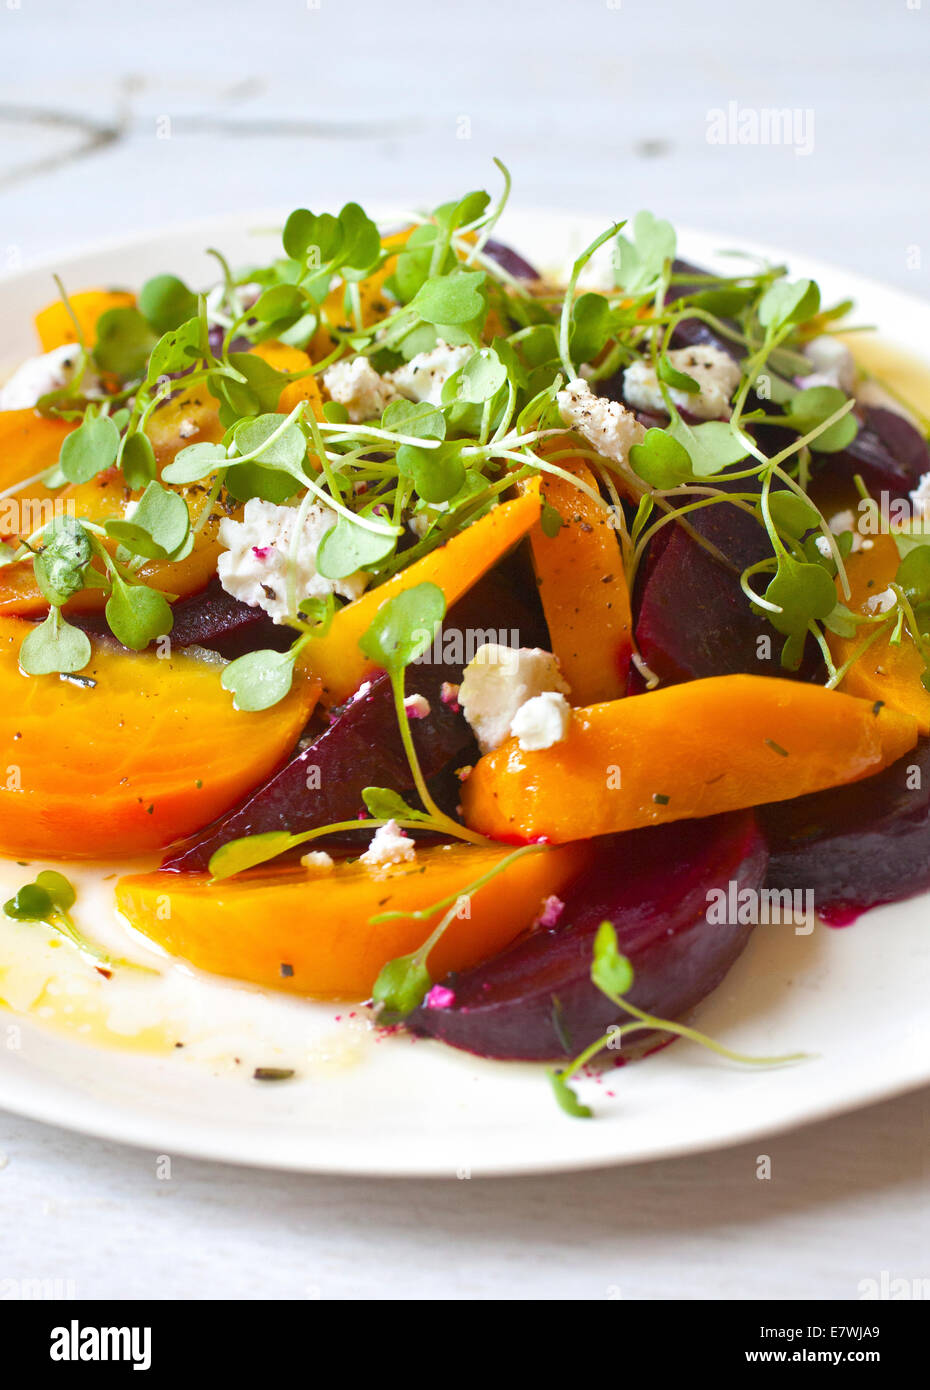 Colorful beet salad plated on white plate and backdrop. Yellow beets, orange beets, red beets. Stock Photo